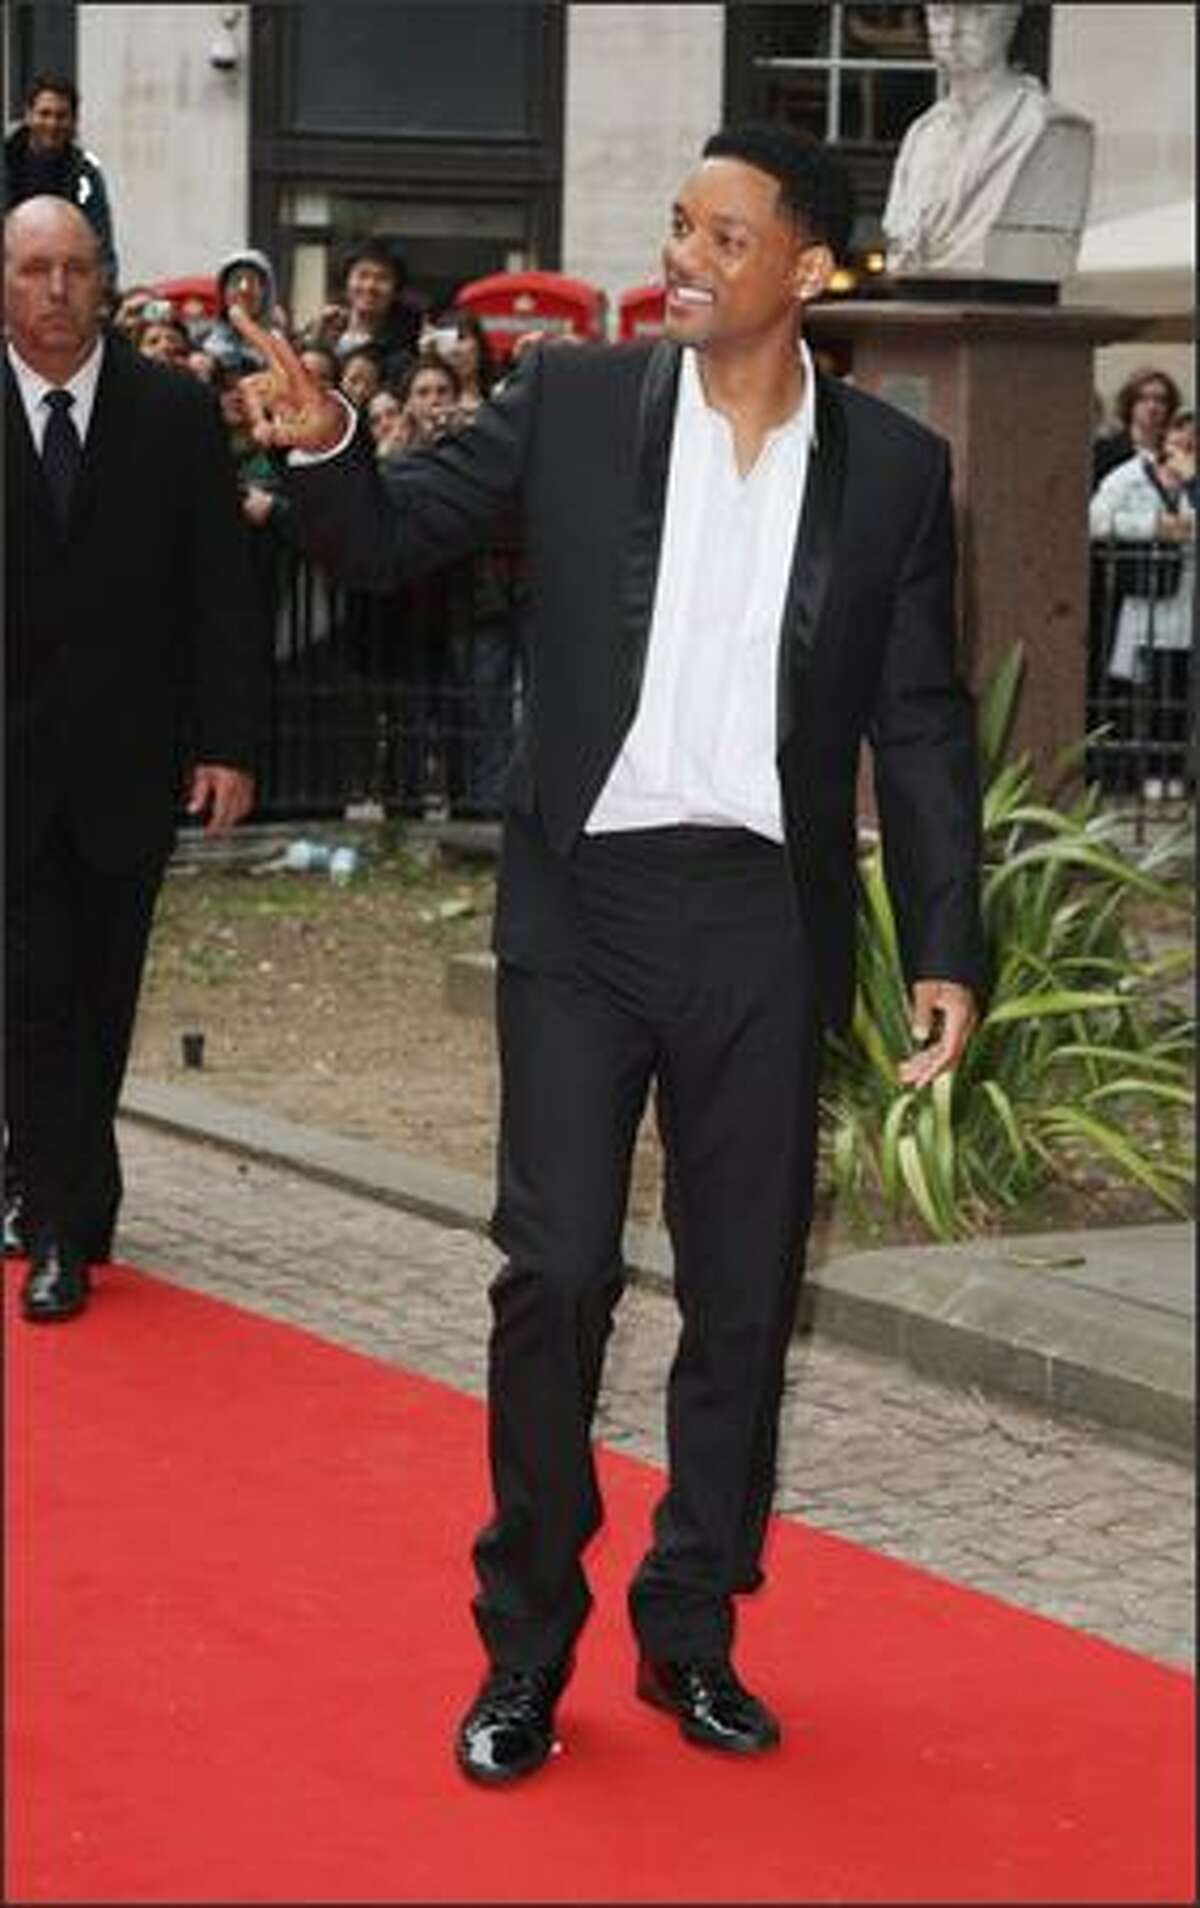 Actor Will Smith arrives at the "Hancock" premiere at Leicester Square on Wednesday in London.